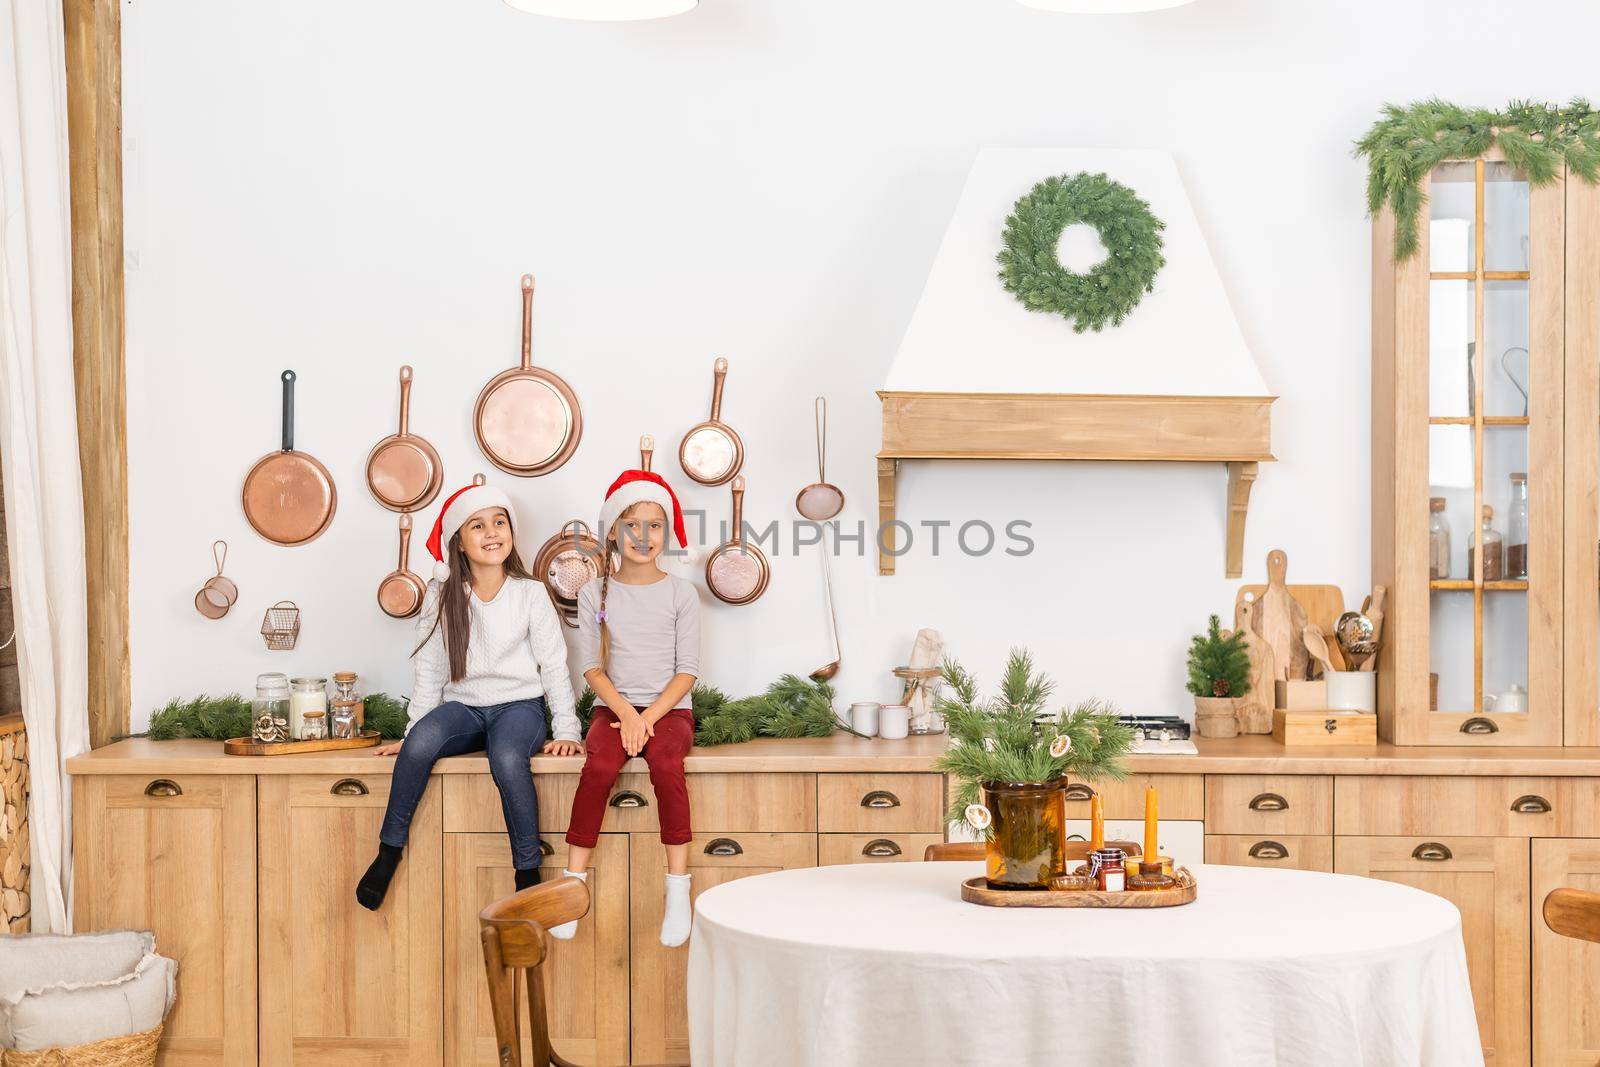 waiting for the holidays together. Little girls having fun.